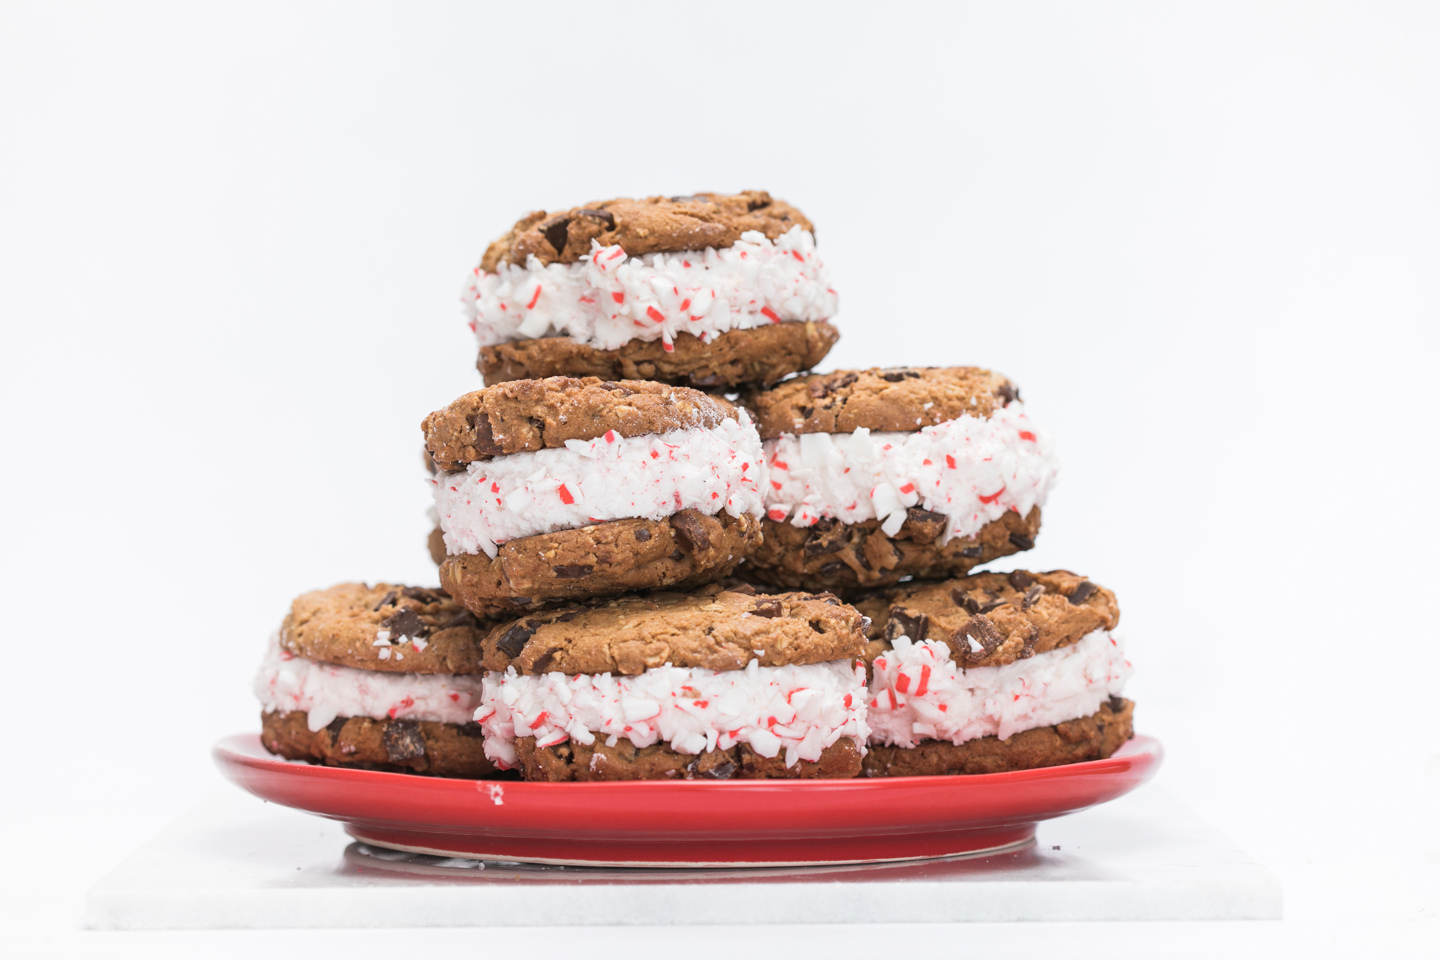 Peppermint ice cream cookie sandwiches made with Chick-fil-A Chocolate Chunk Cookies stacked on a red plate. 